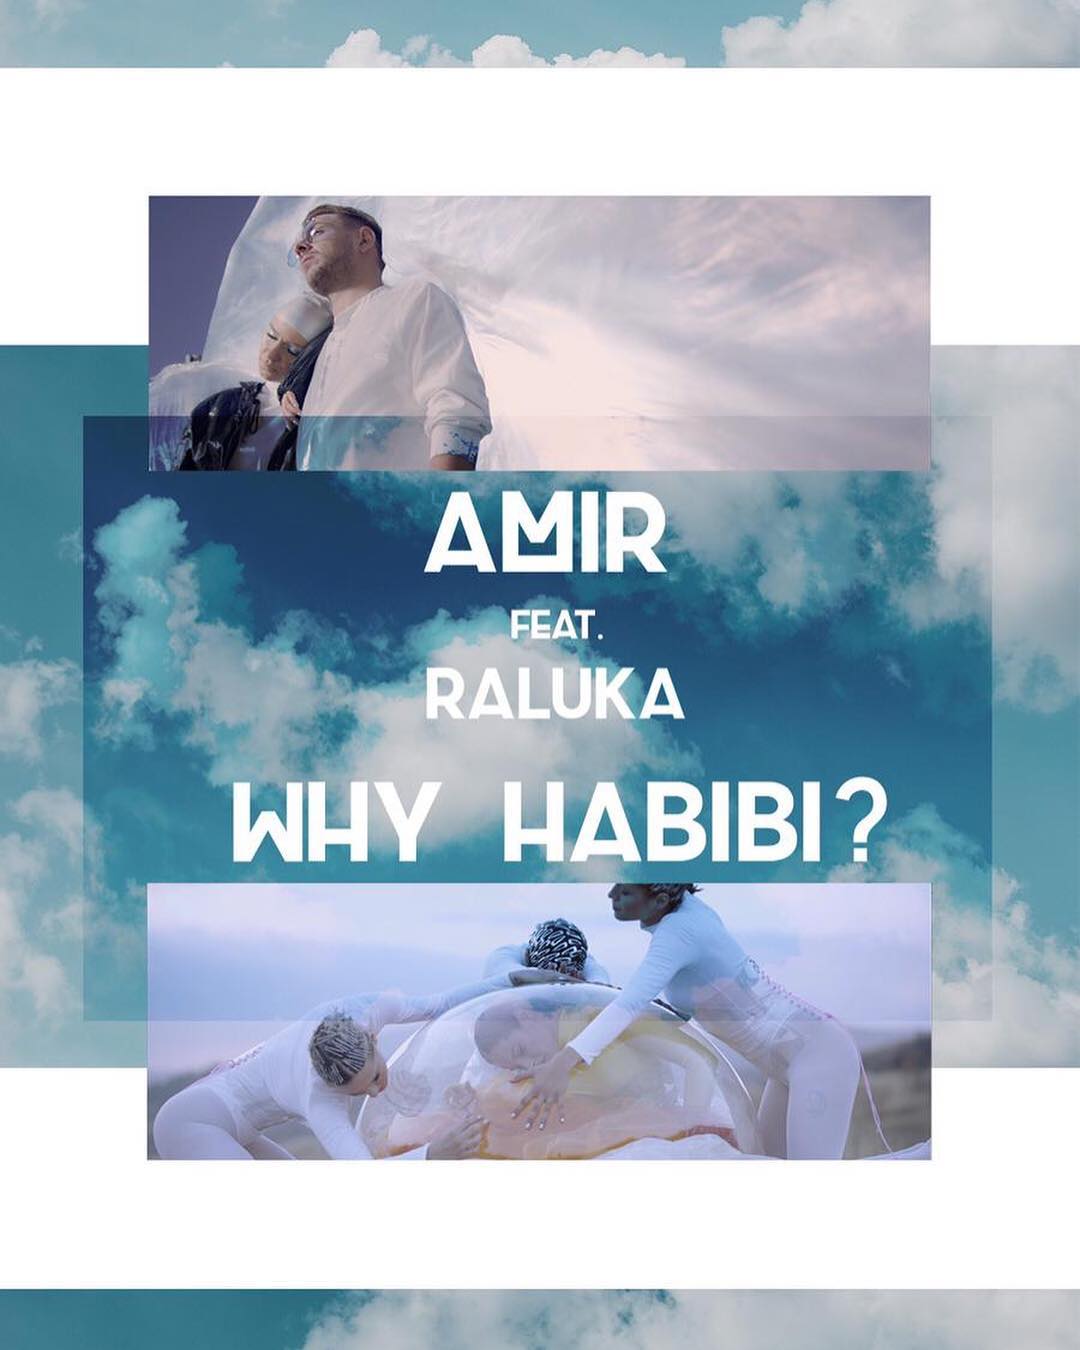 @ralukaofficial just launched a new song with @amirrofficial. #whyhabibi…